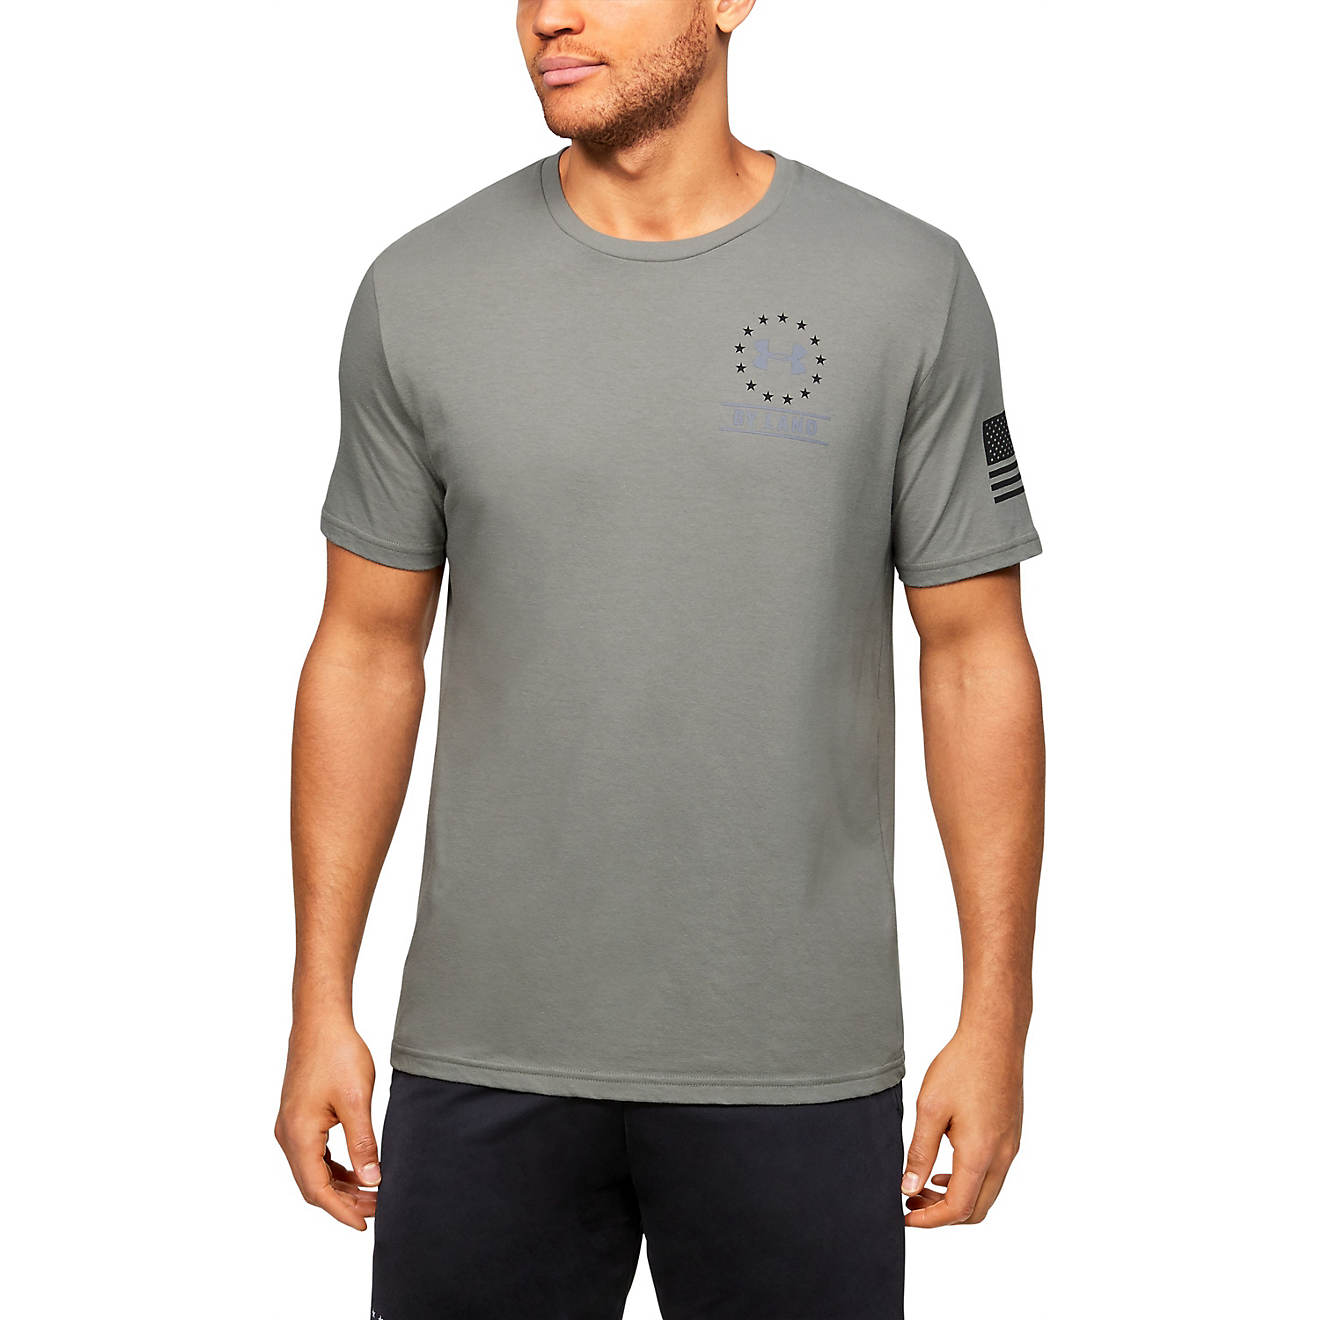 Under Armour Men's Freedom By Land T-shirt | Academy